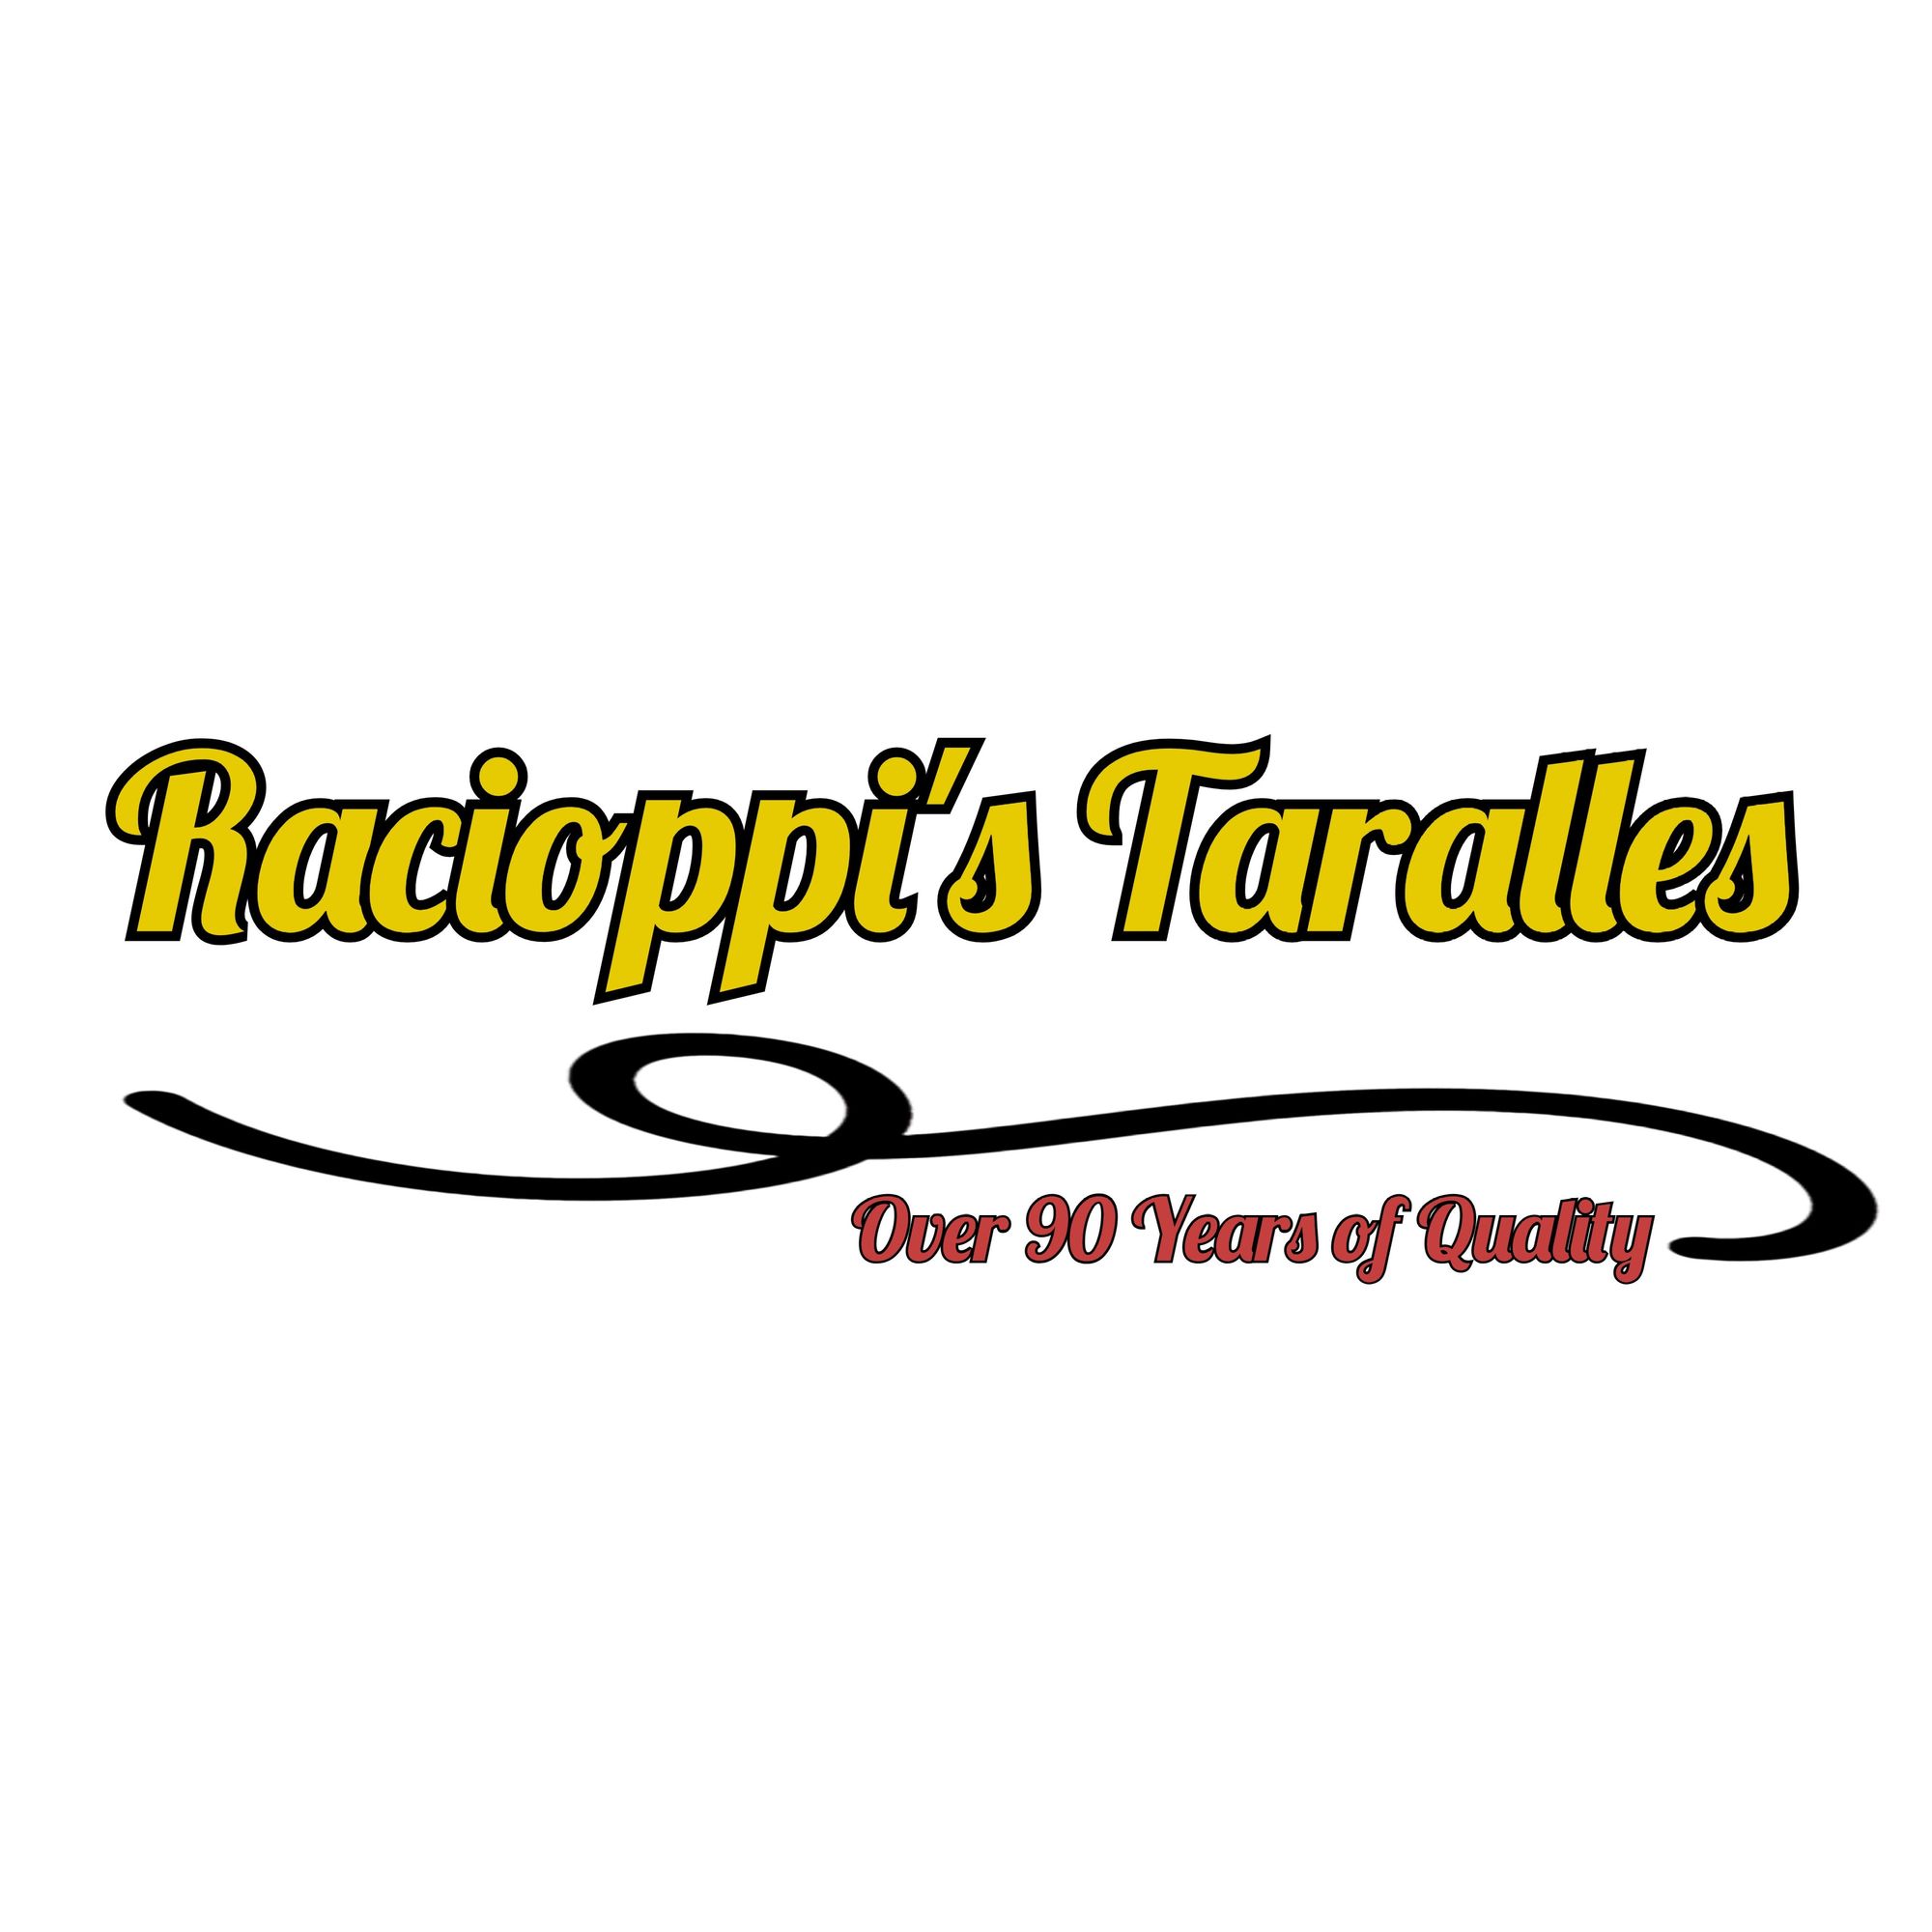 Keeping the 90-year Tradition Going- Racioppi's Taralles